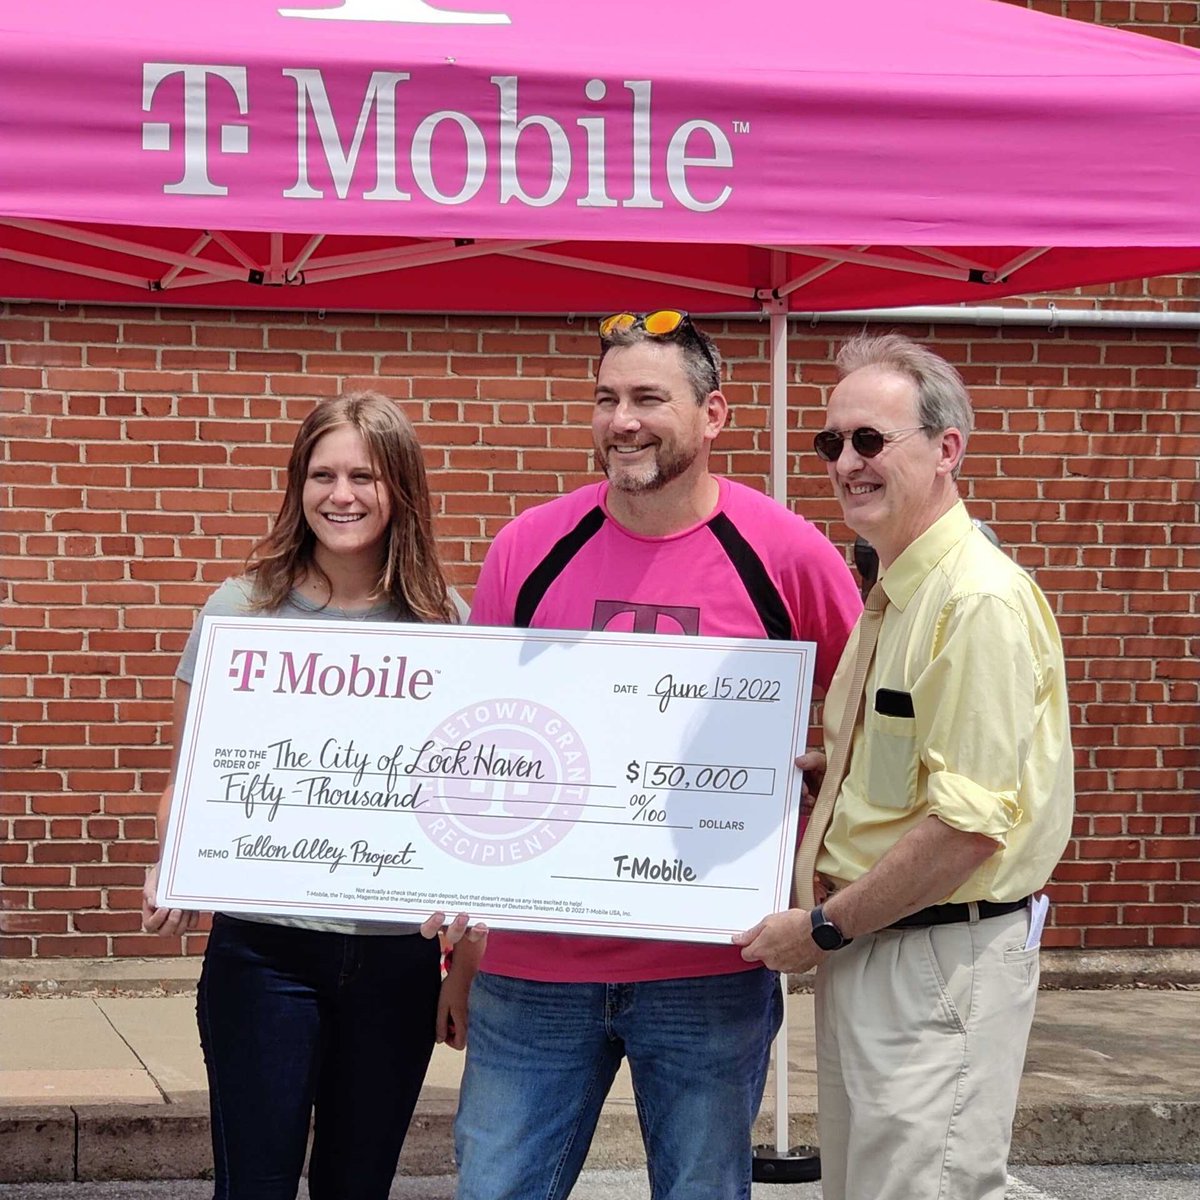 #CityofLockHaven needed funding to turn #FallonAlly into an area where the community can gather🏙️, and @TMobile answered with $50K #HometownGrants 💸💰. So proud to be part of this project, and thanks to #FrozenThunder for making today extra cool!🍦.